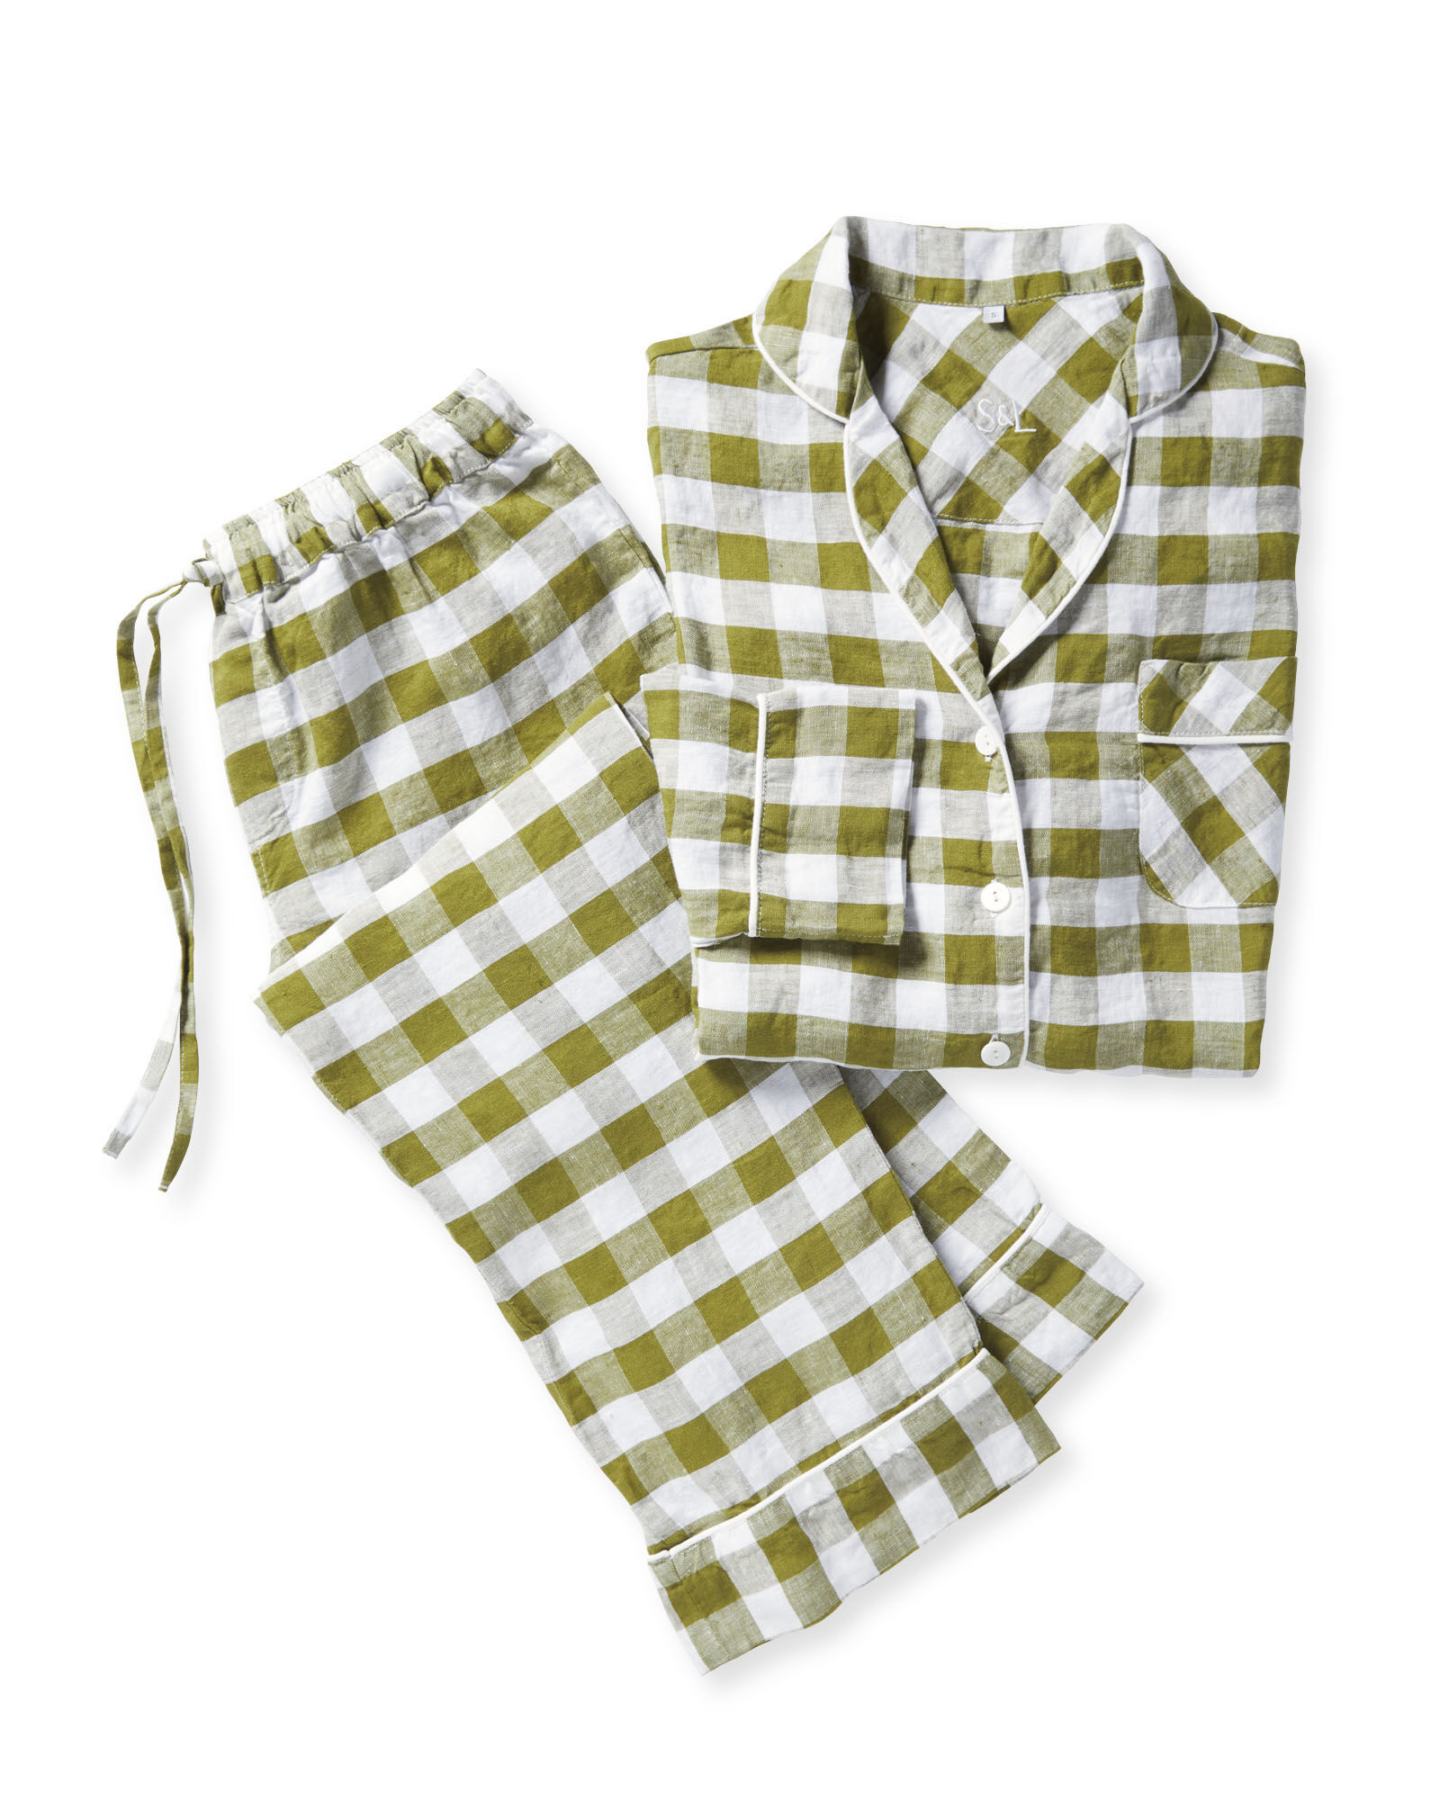 Hyannis Linen Pajamas (Grove) checkered pattern, Serena & Lily